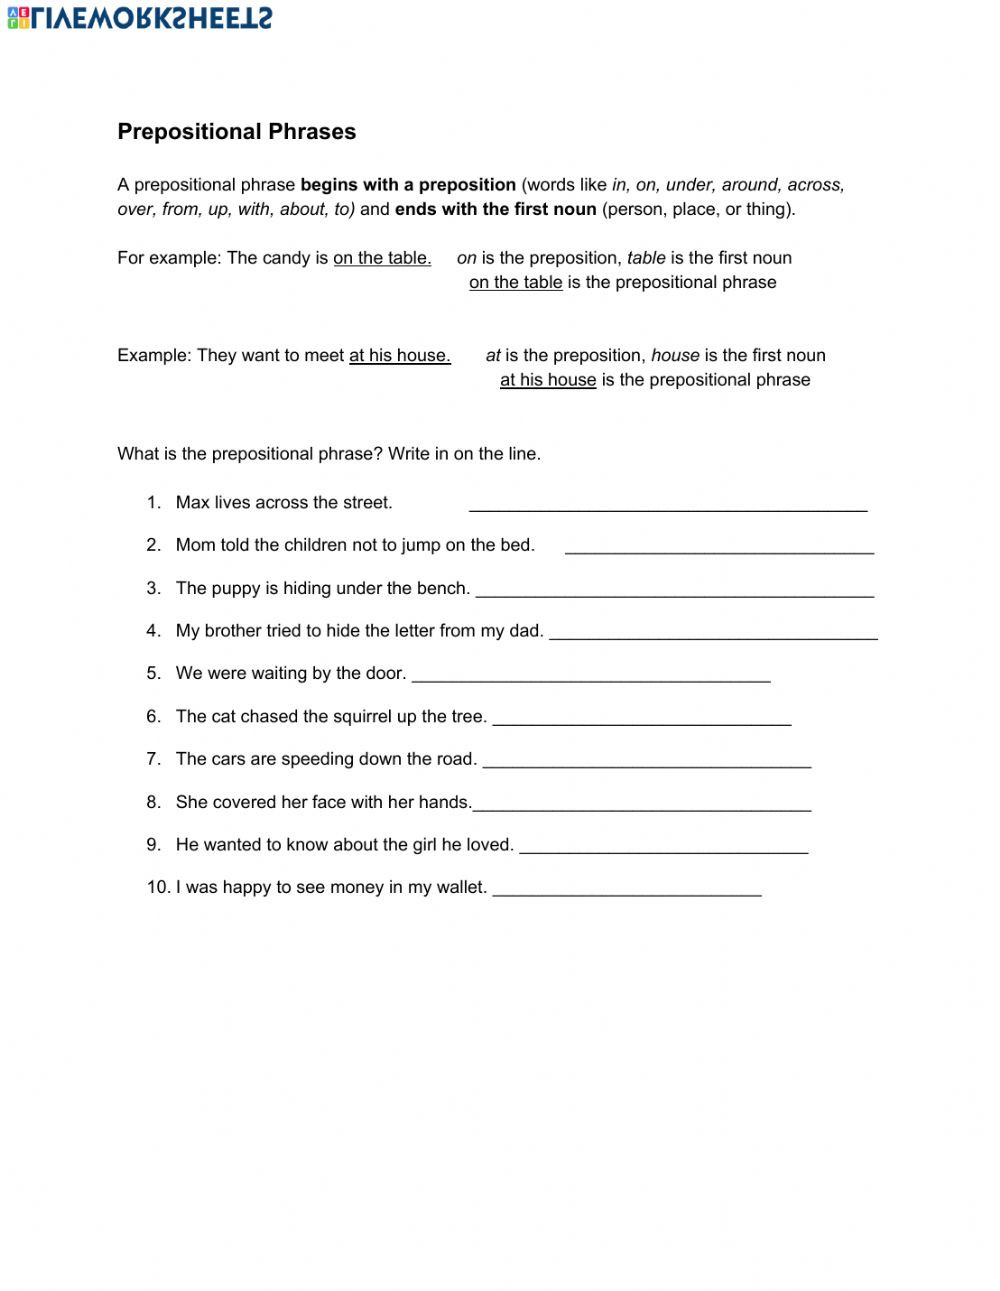 Prepositional Phrase Worksheet with Answers Prepositional Phrase Interactive Worksheet